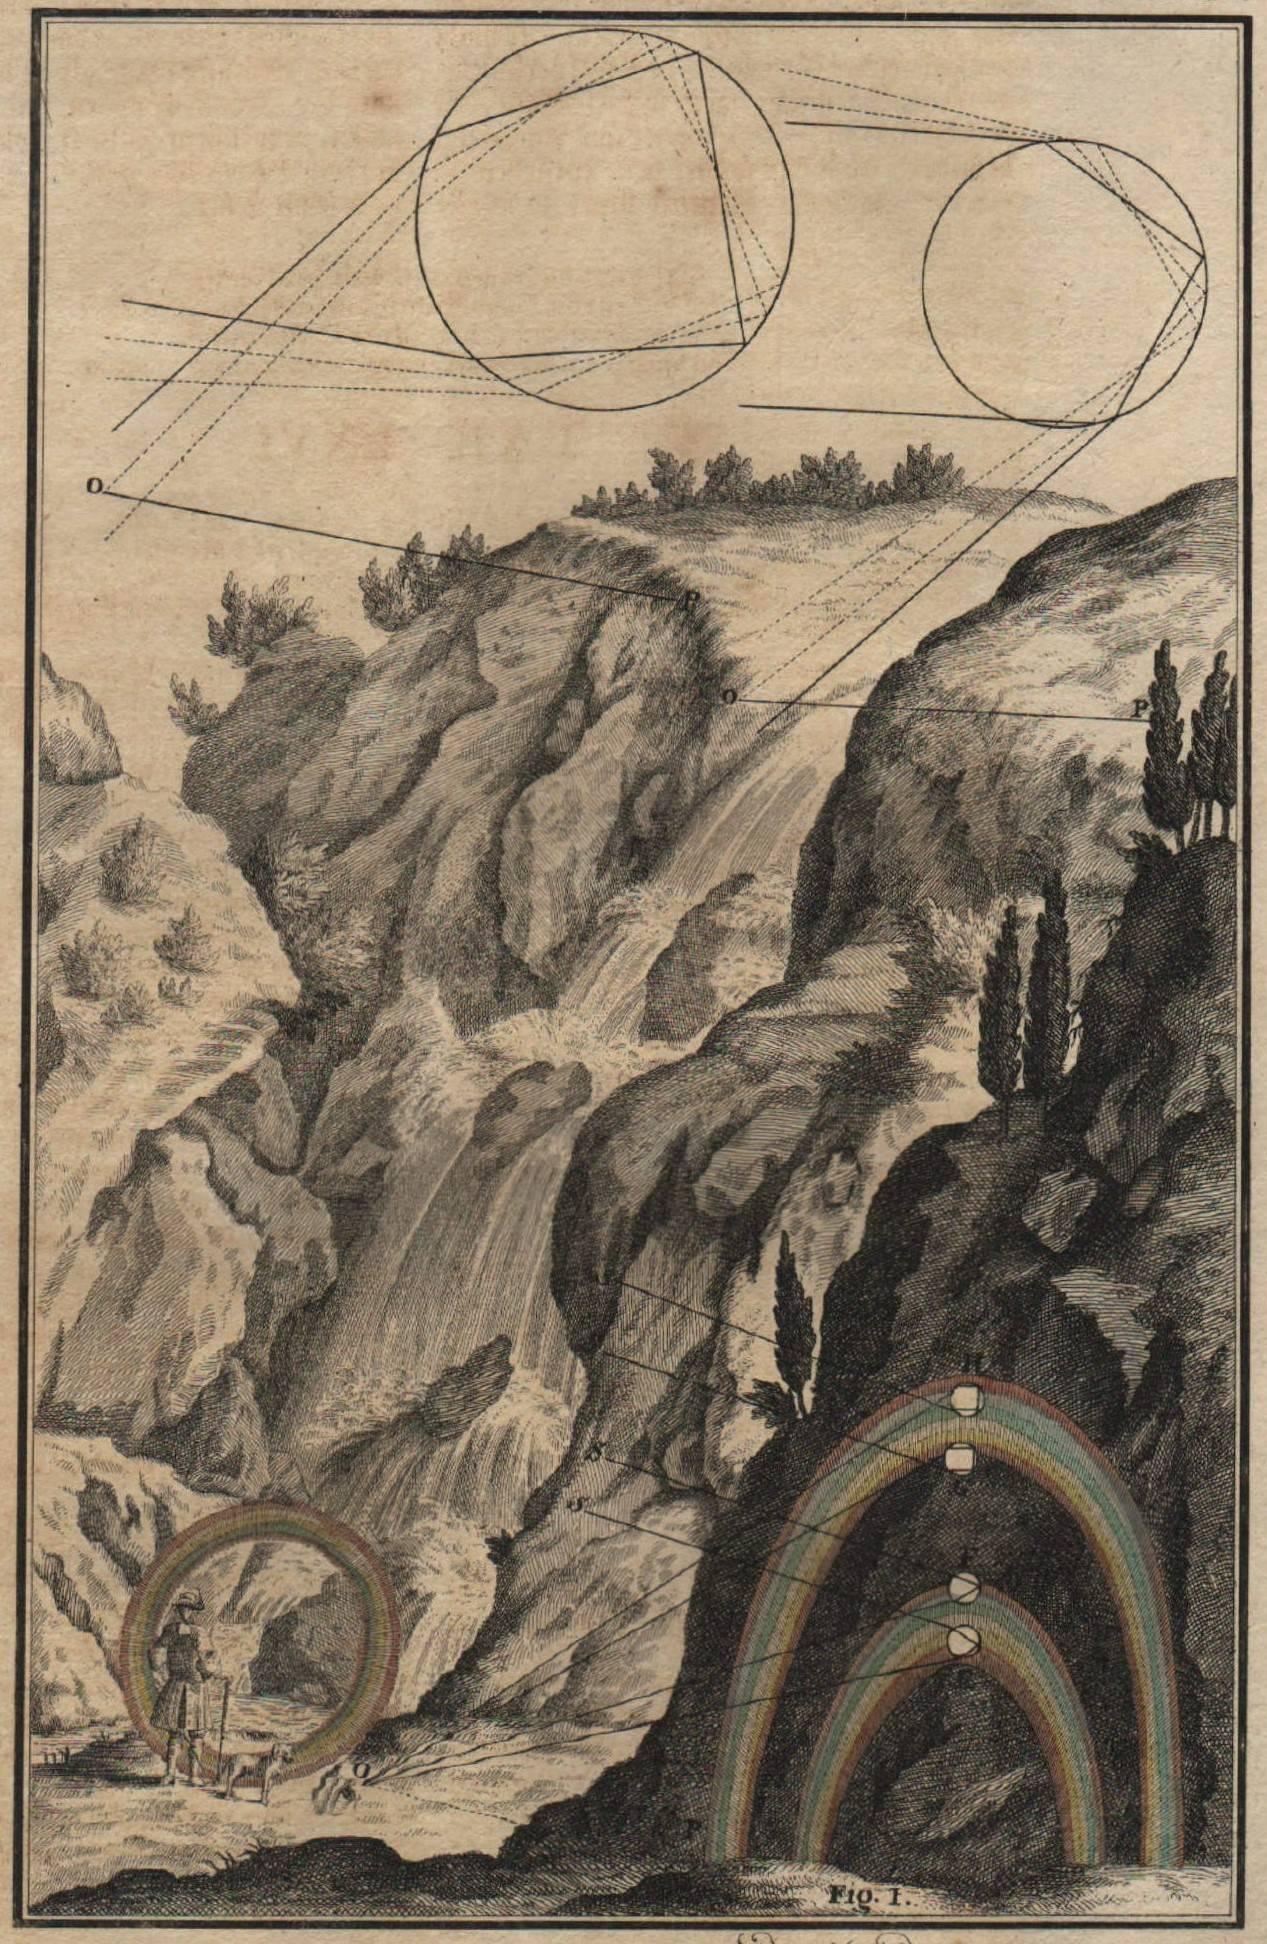 Promise of the Rainbow and Explanation, Johann Scheuchzer Physica Sacra In Good Condition For Sale In Albany, OR